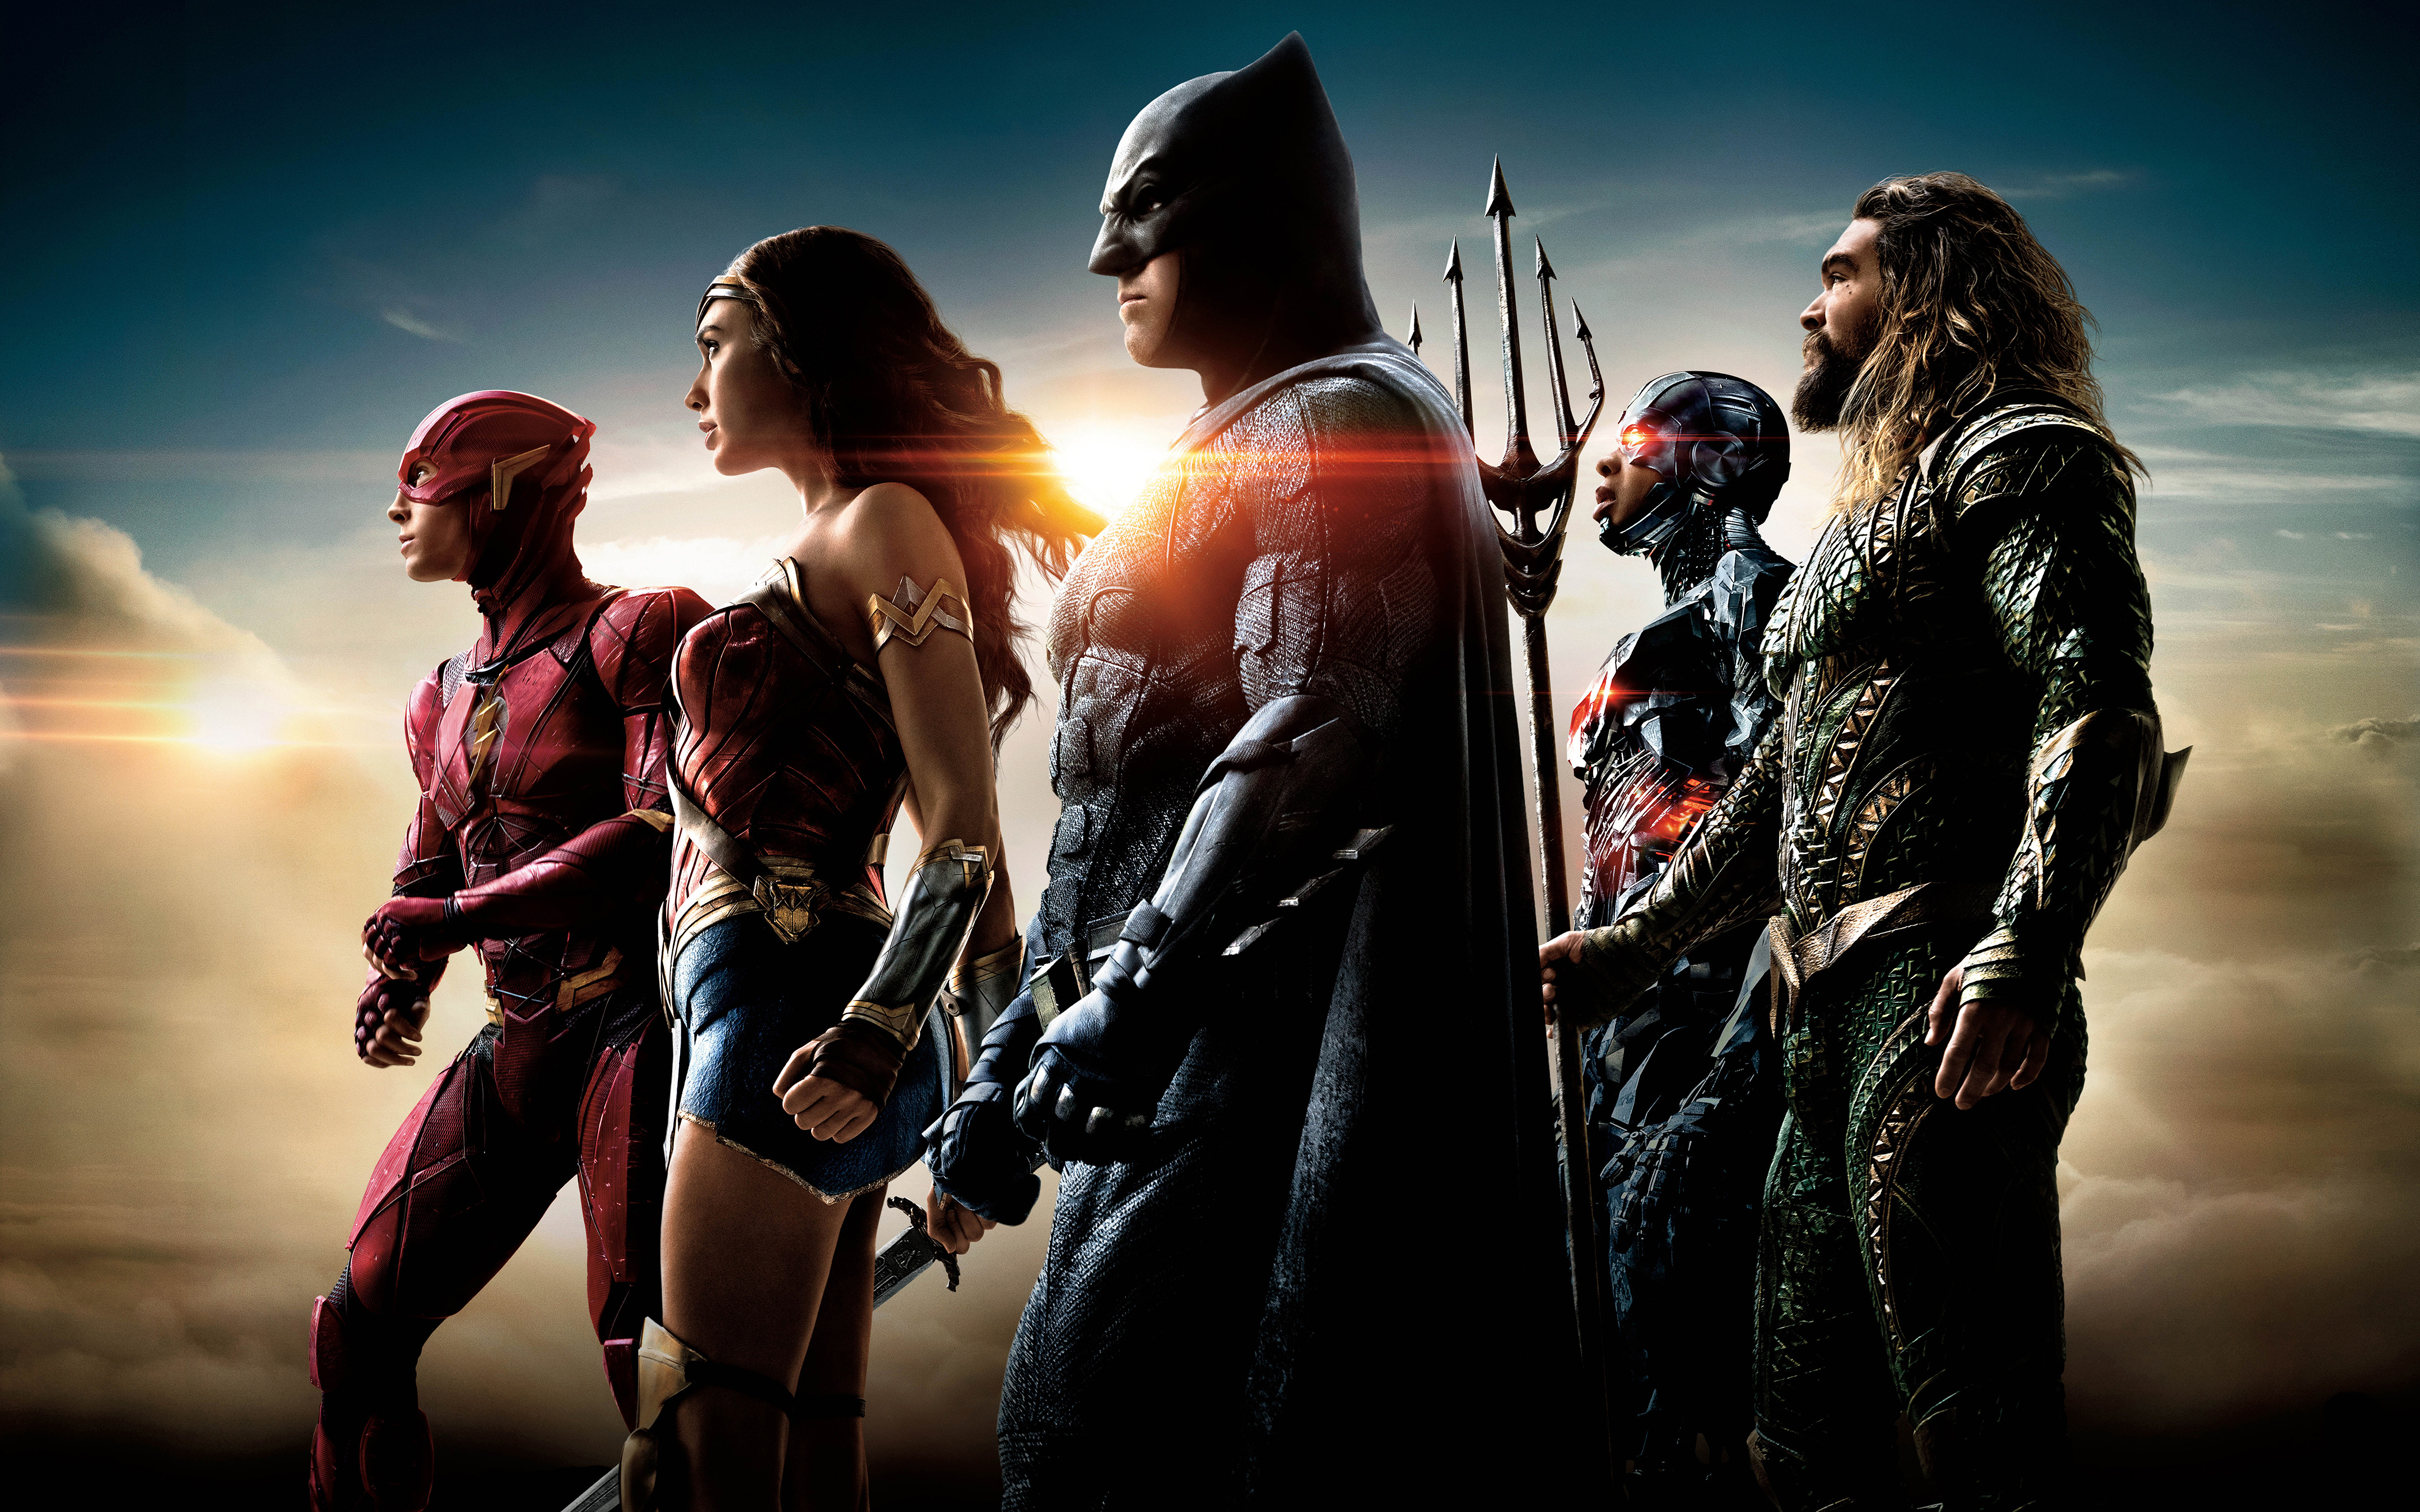 justice league 4k download free